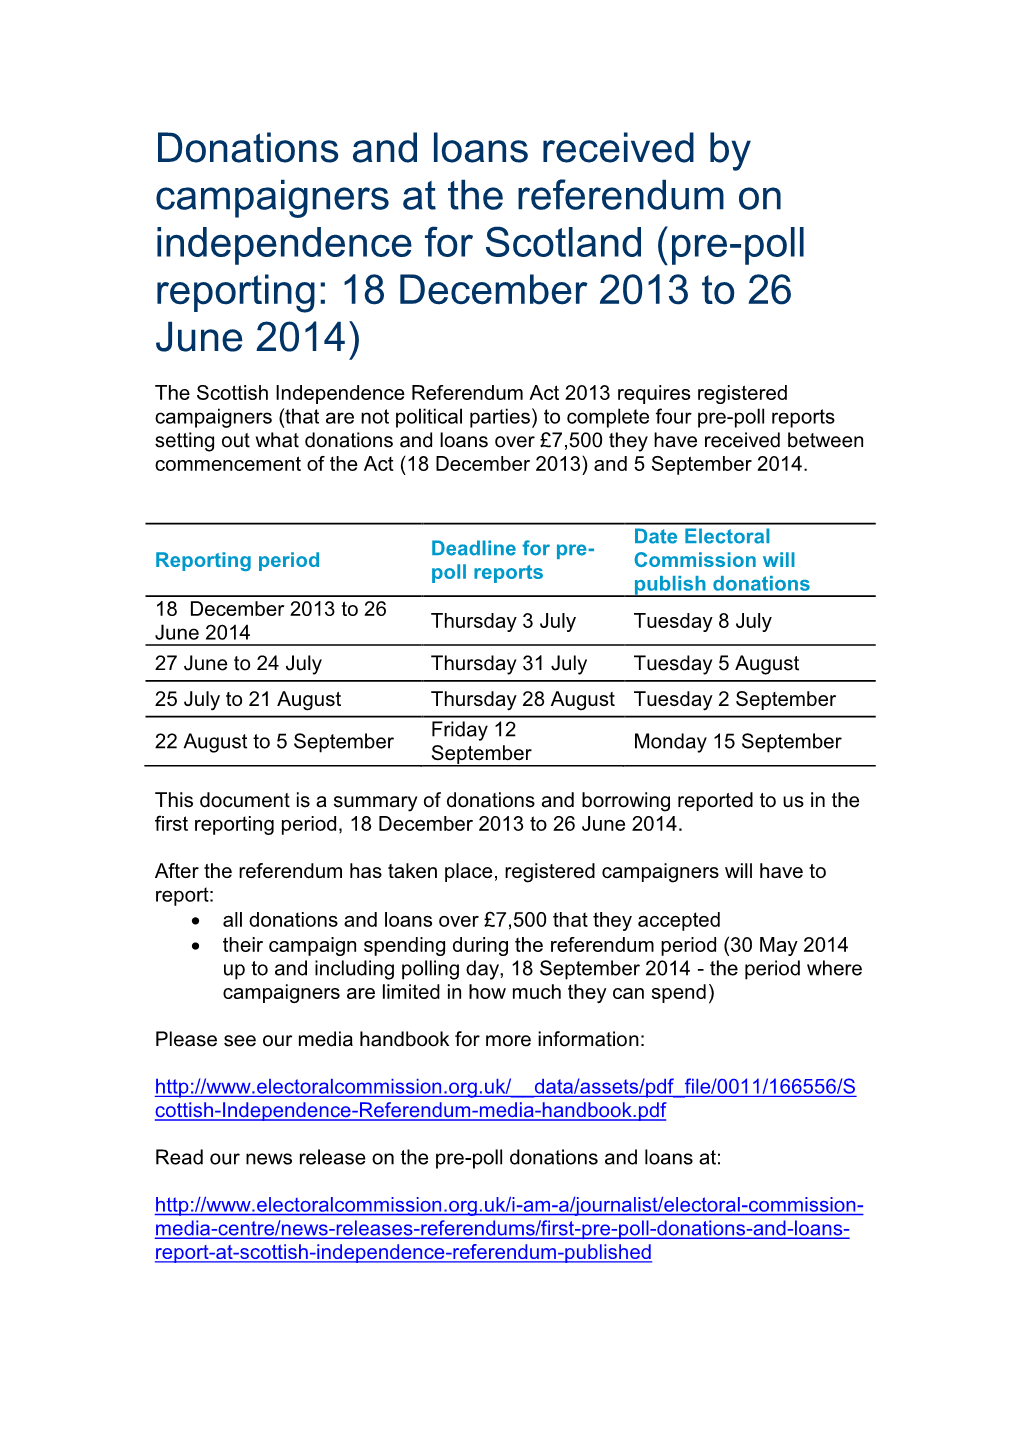 Donations and Loans Received by Campaigners at the Referendum on Independence for Scotland (Pre-Poll Reporting: 18 December 2013 to 26 June 2014)